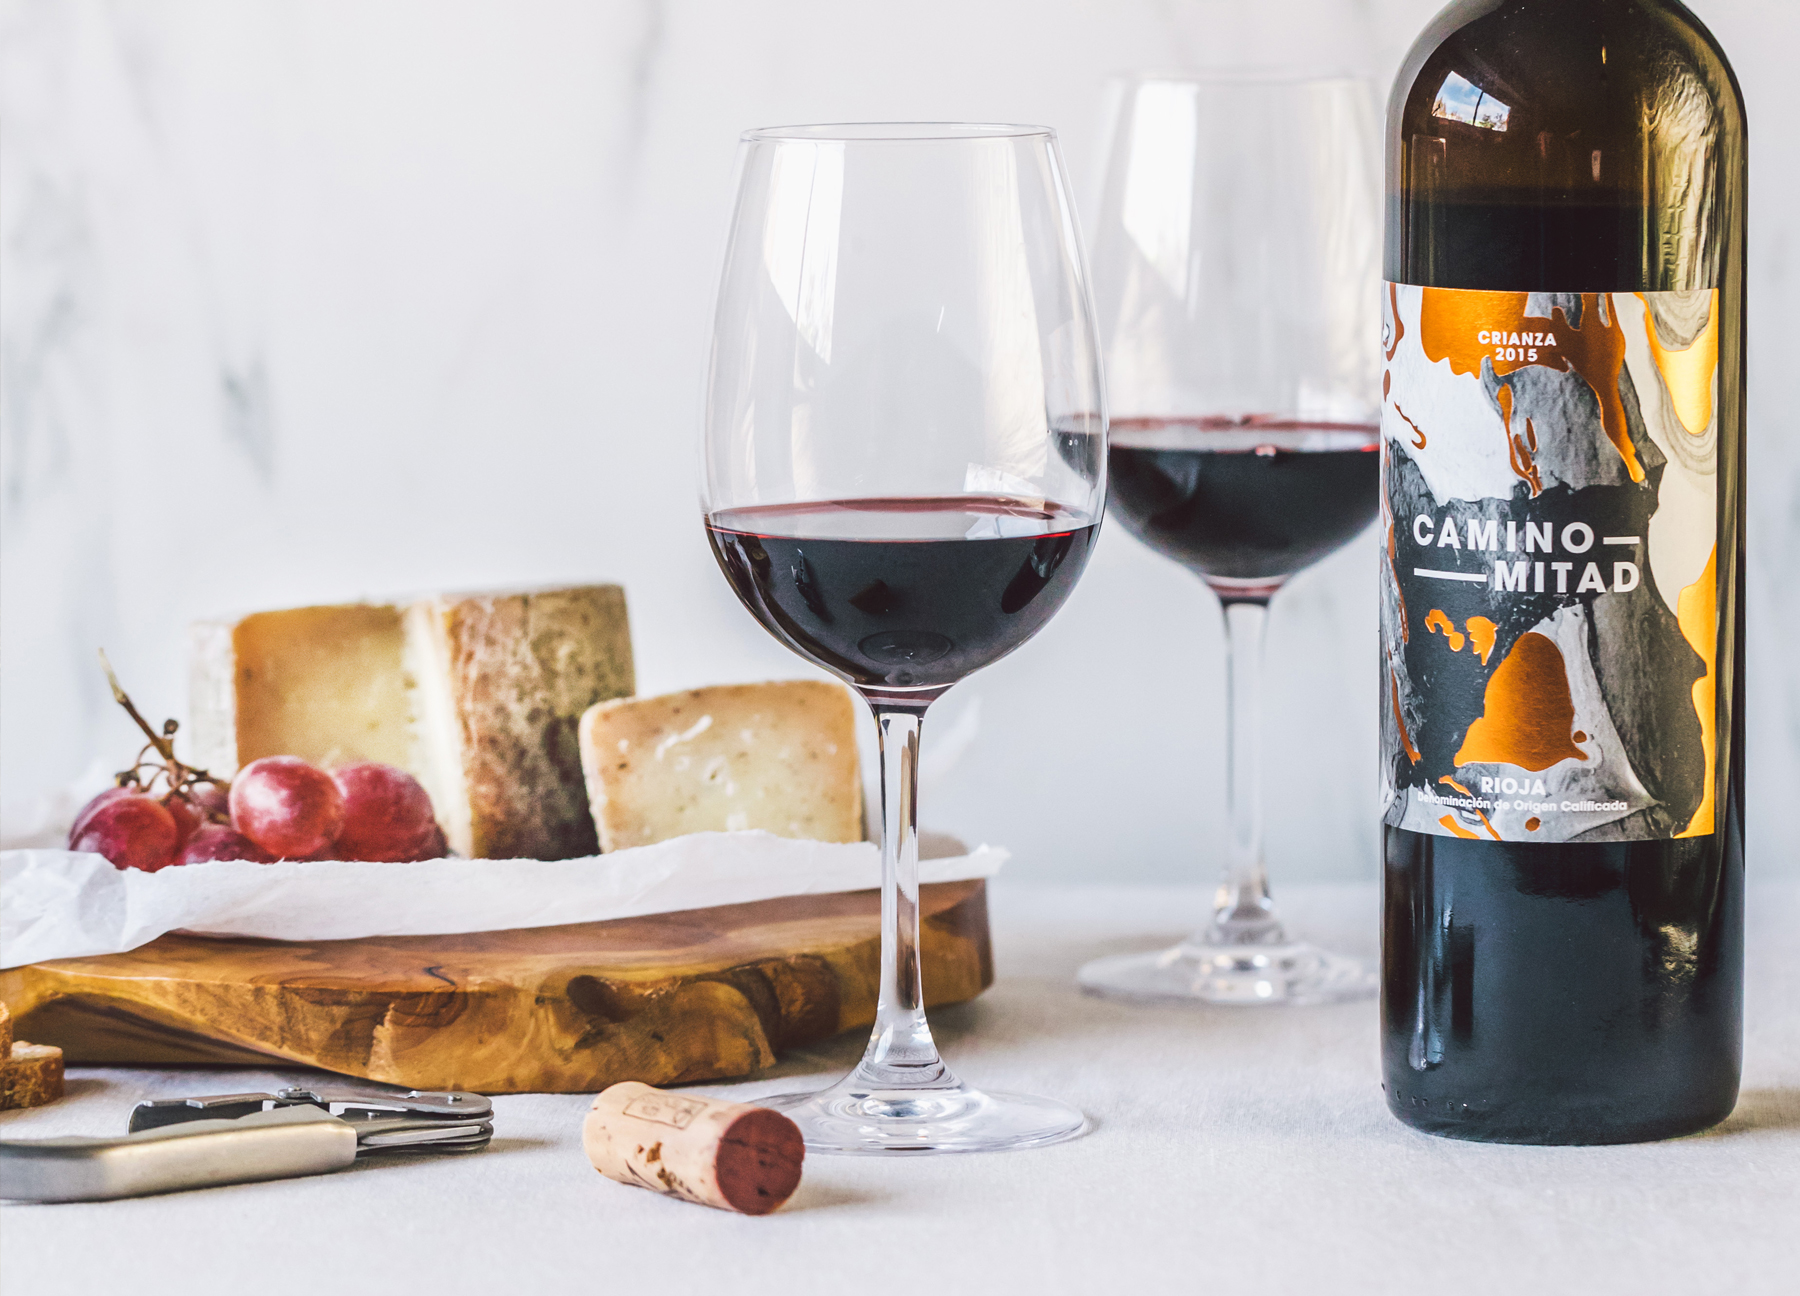 Cheese and wine, the perfect match?